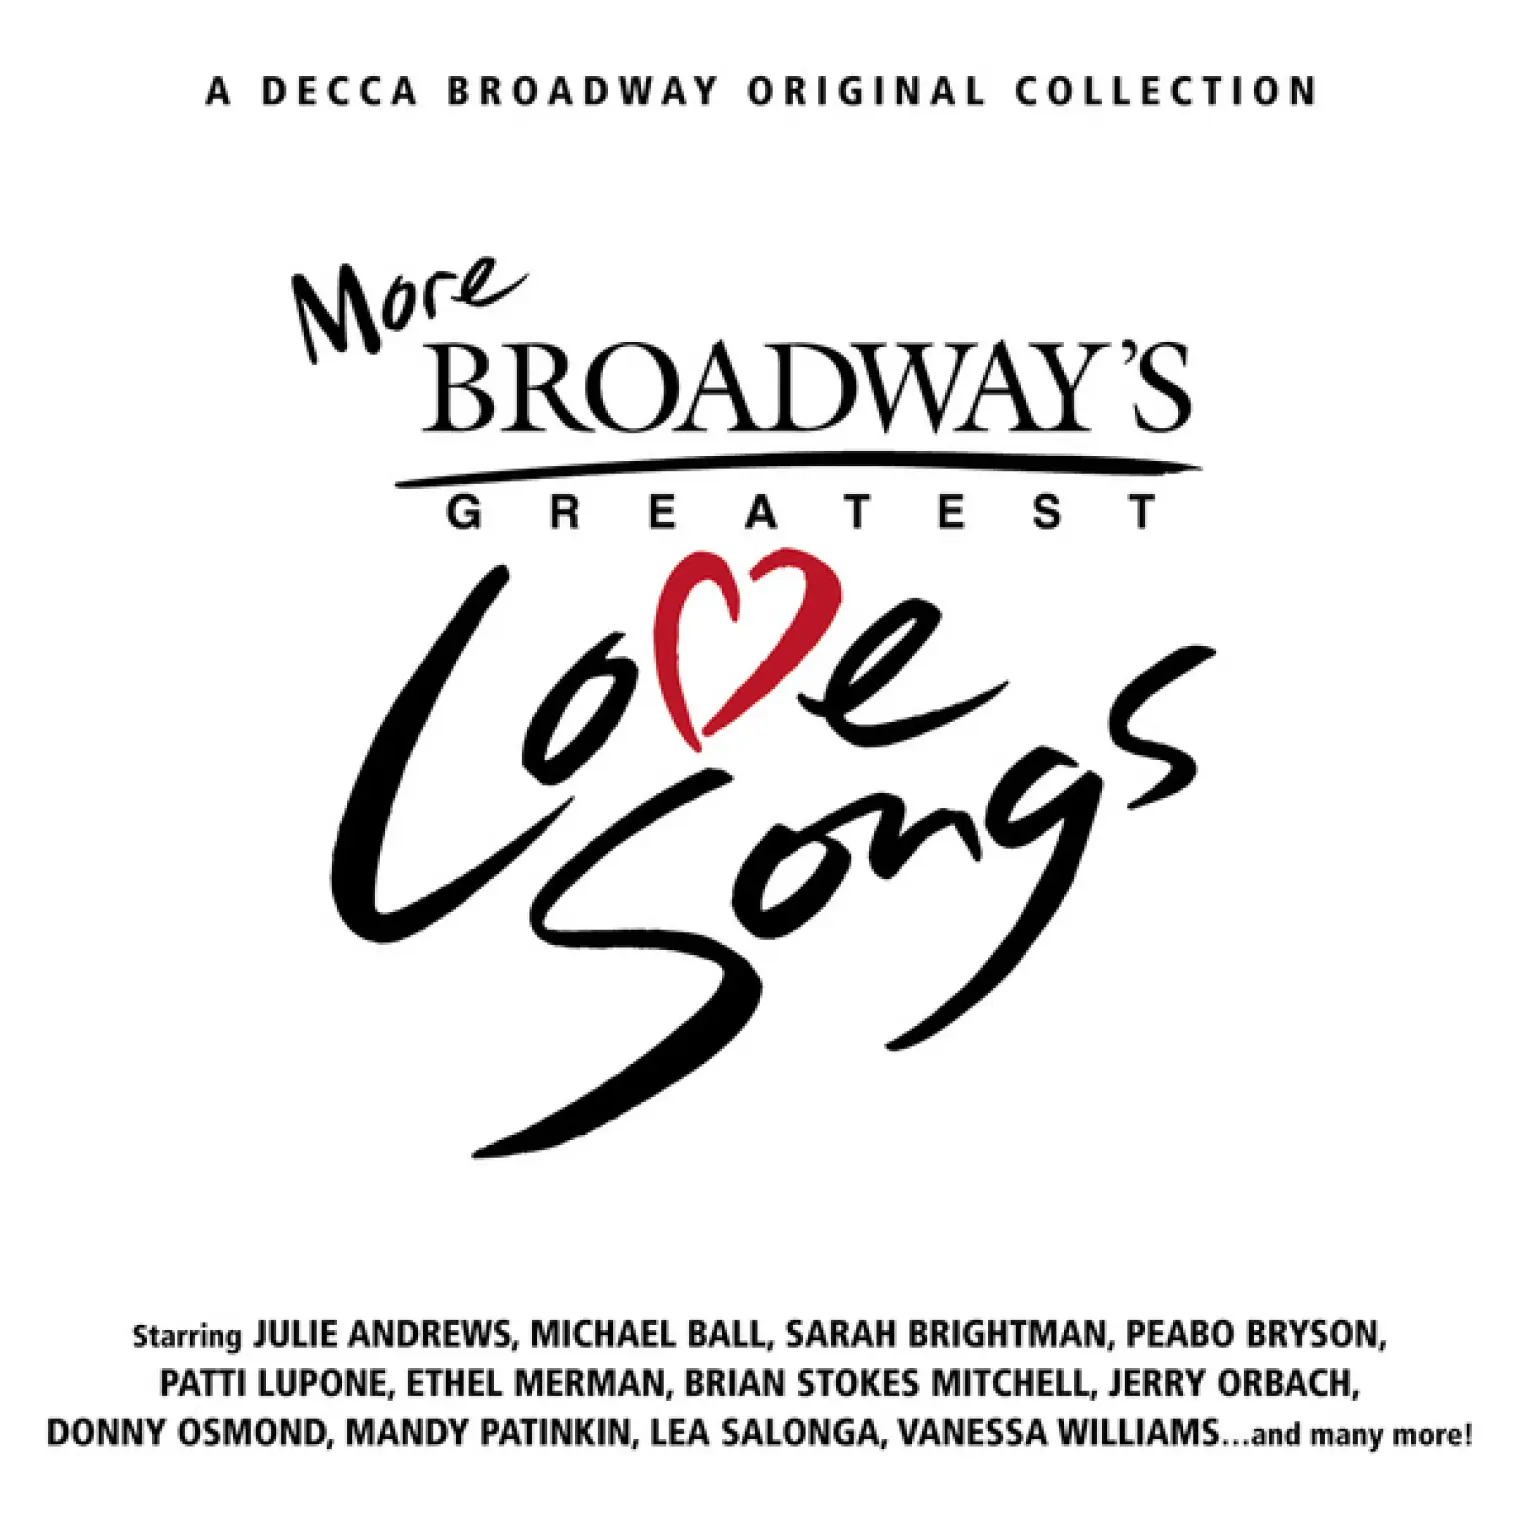 More Broadway Love Songs -  Various Artists 